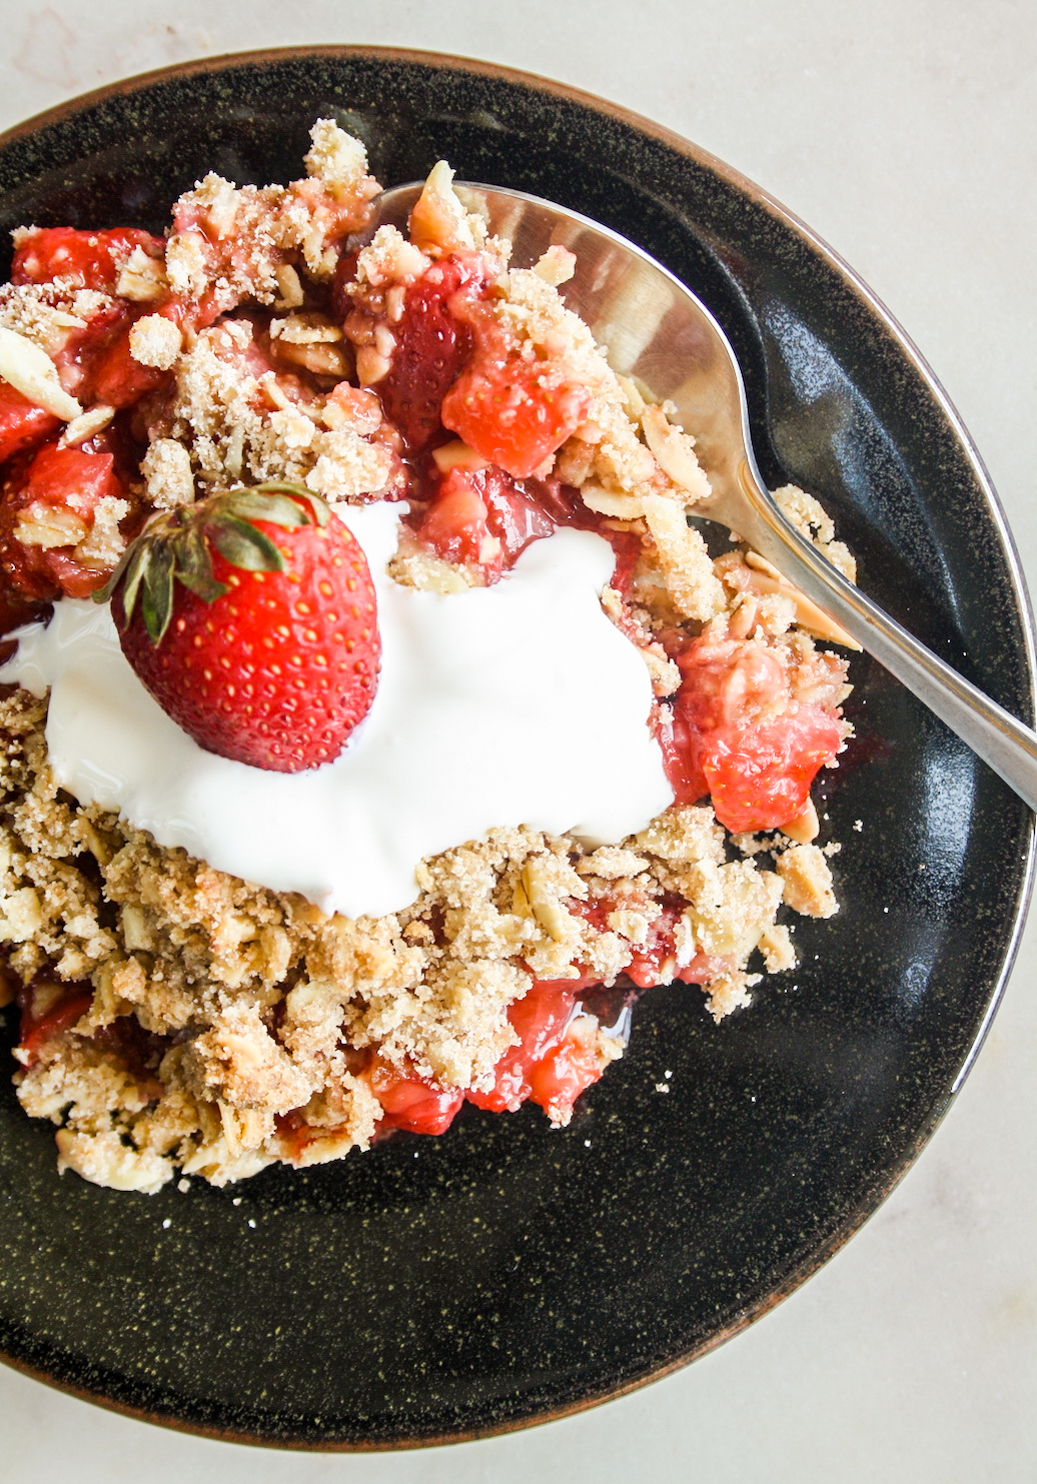 Juicy strawberries with a crunchy almond and oat crumble